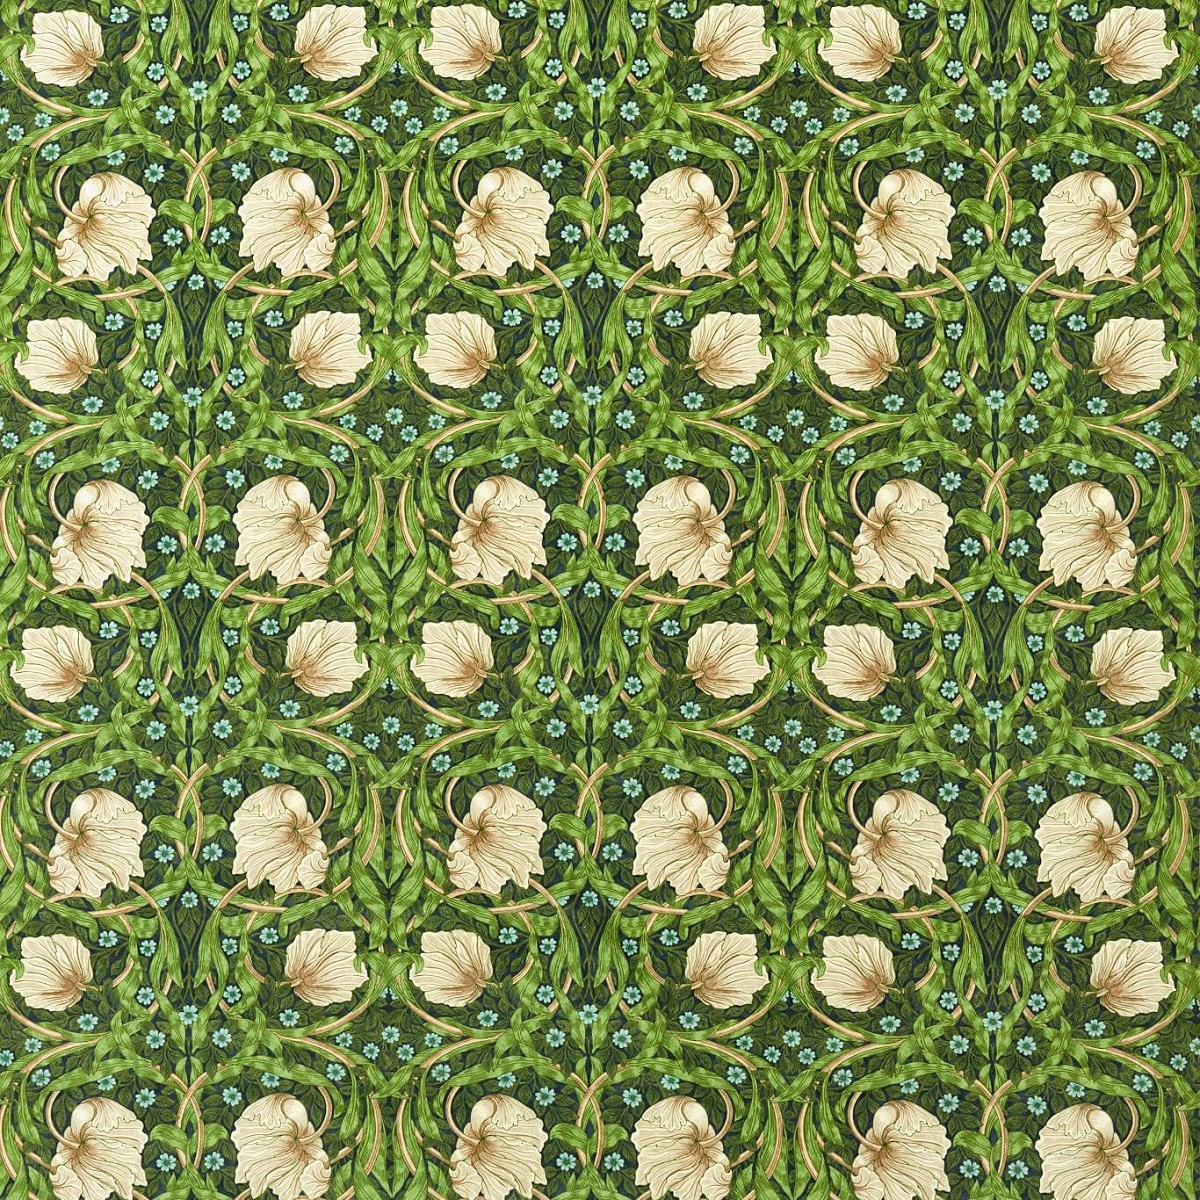 Pimpernel Midnight Fields Fabric by William Morris & Co.